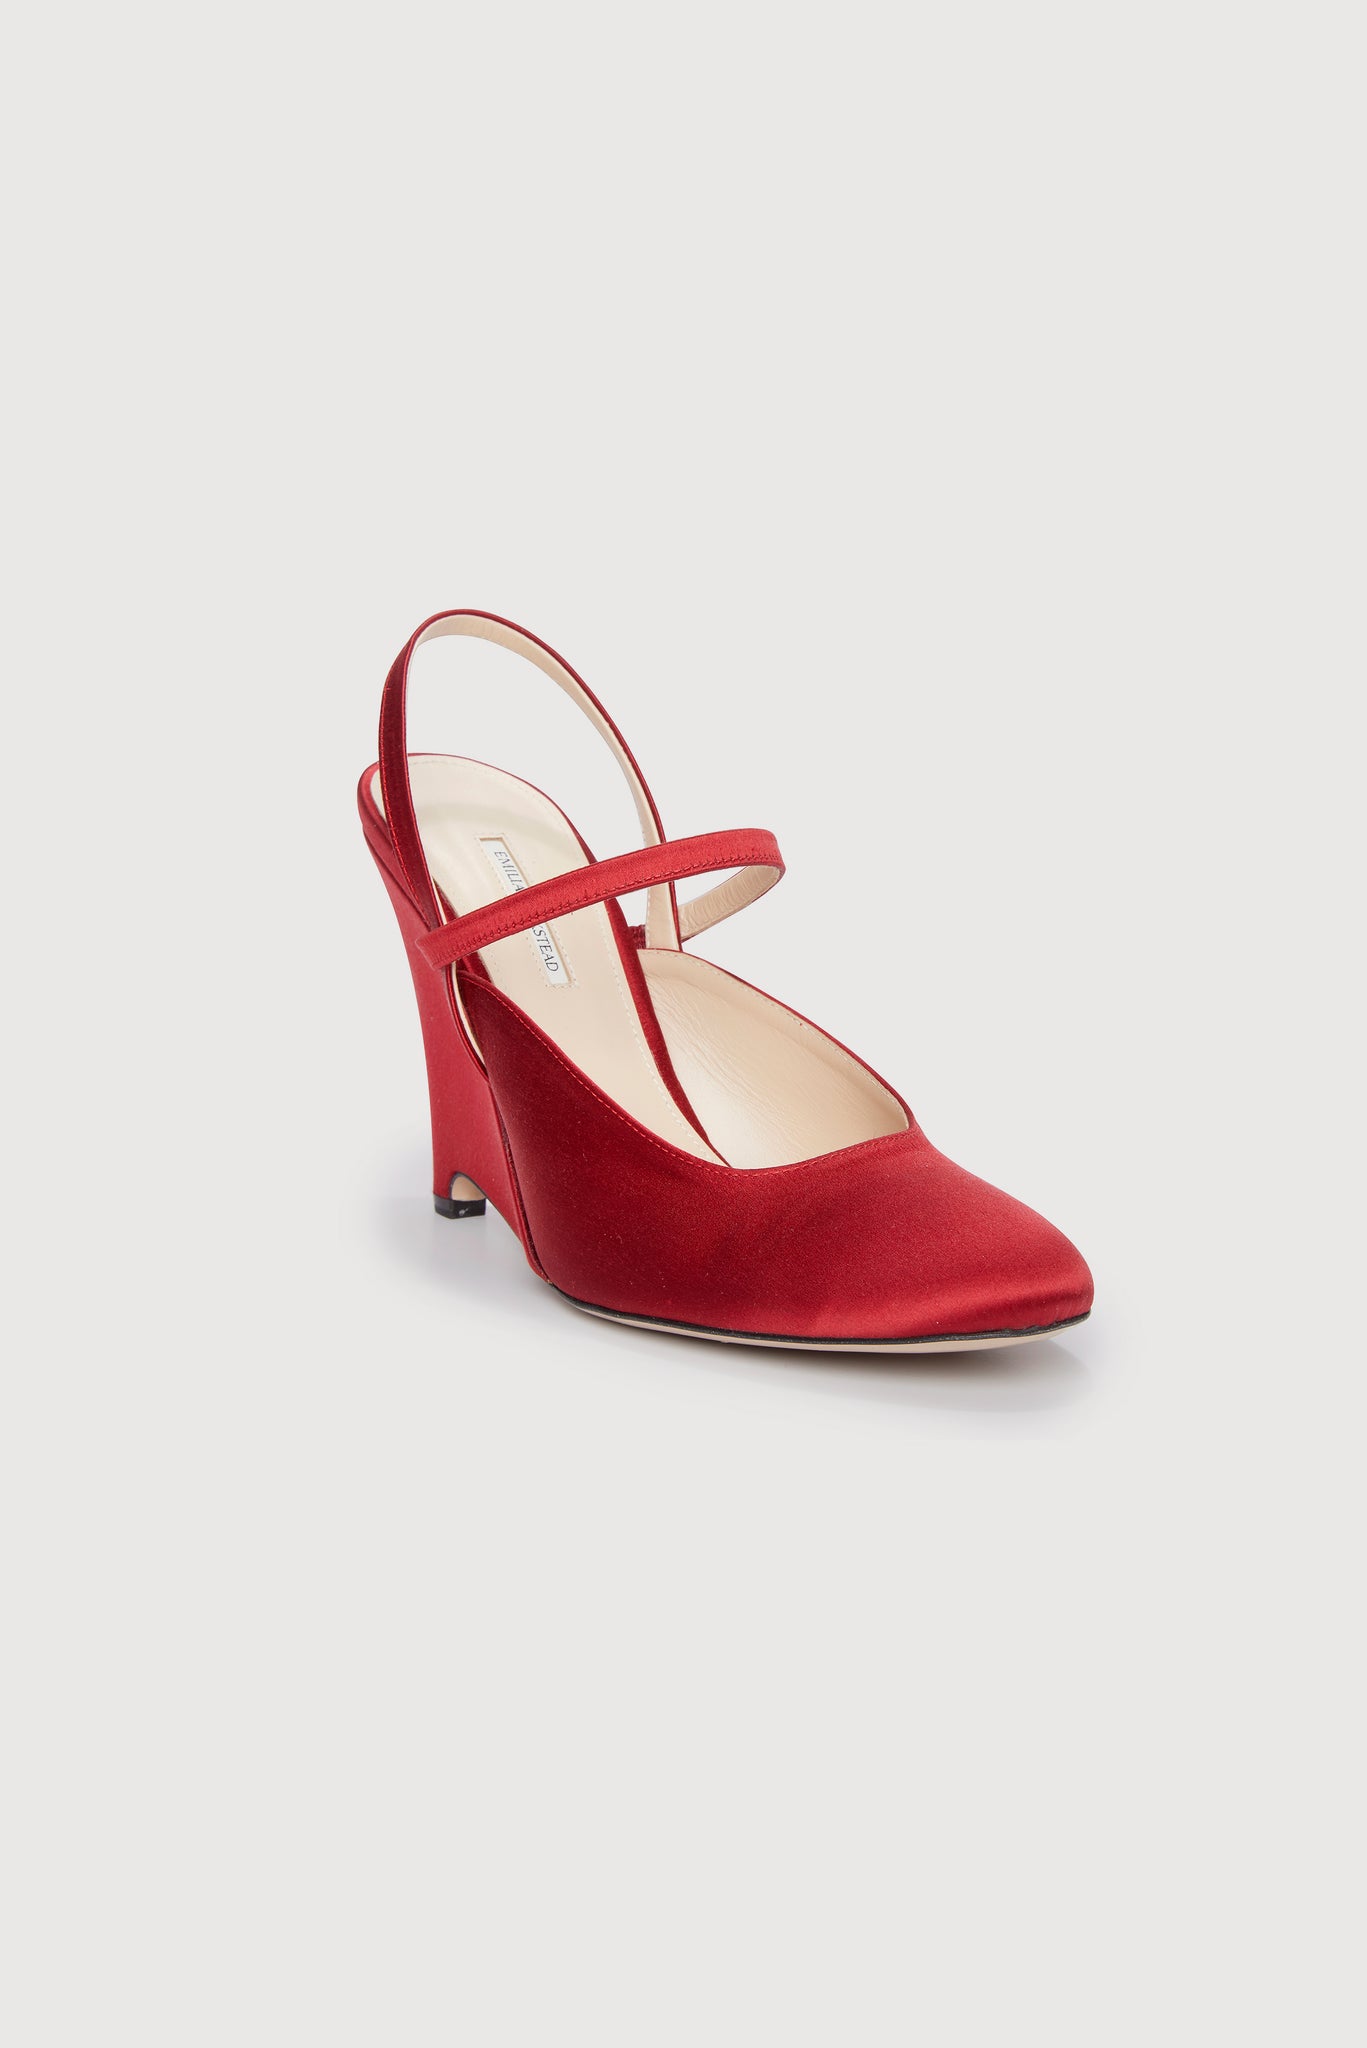 Aster Red Satin Wedge Shoes | Emilia Wickstead